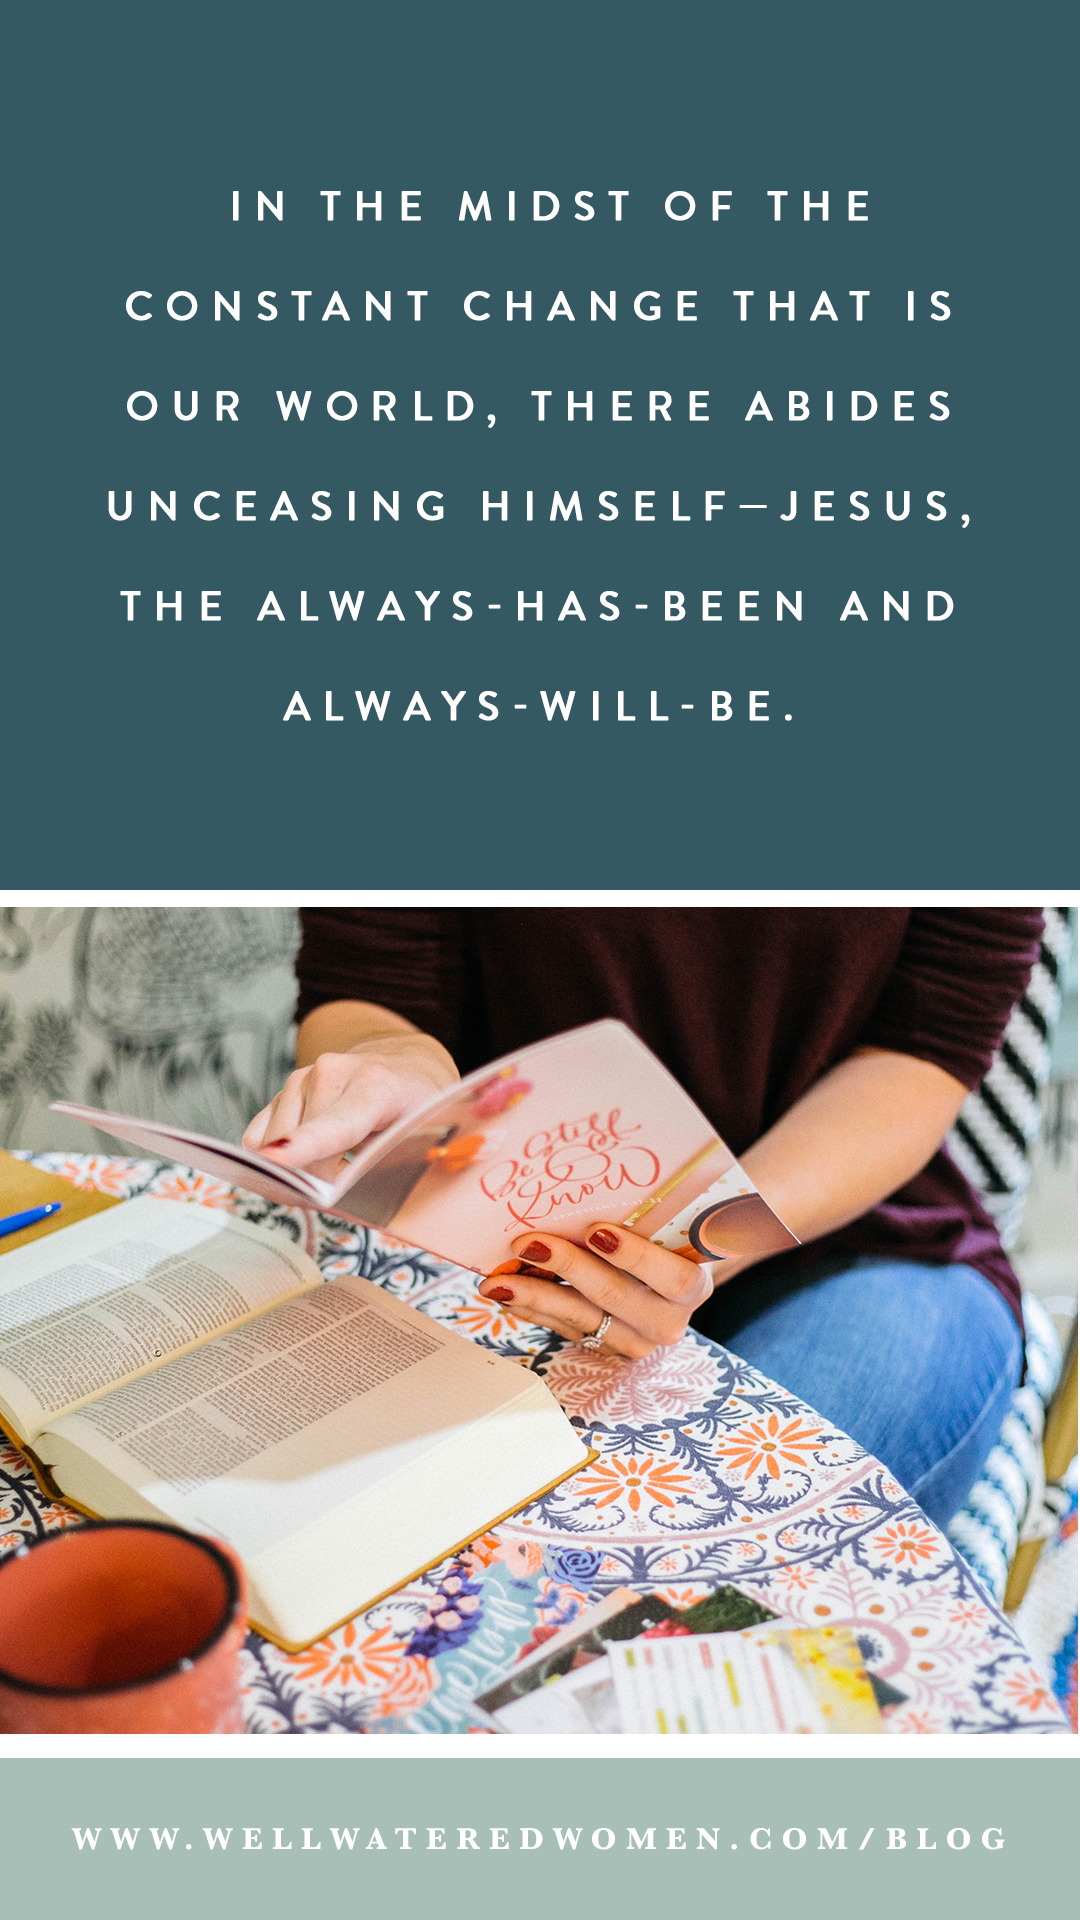 Unceasing Prayer: In the midst of the constant change that is our world, there abides Unceasing Himself—Jesus, the always-has-been and always-will-be. What’s more, we have access to Him at all hours of the day. We can come to him as often as we want; in fact, we were designed to do so.